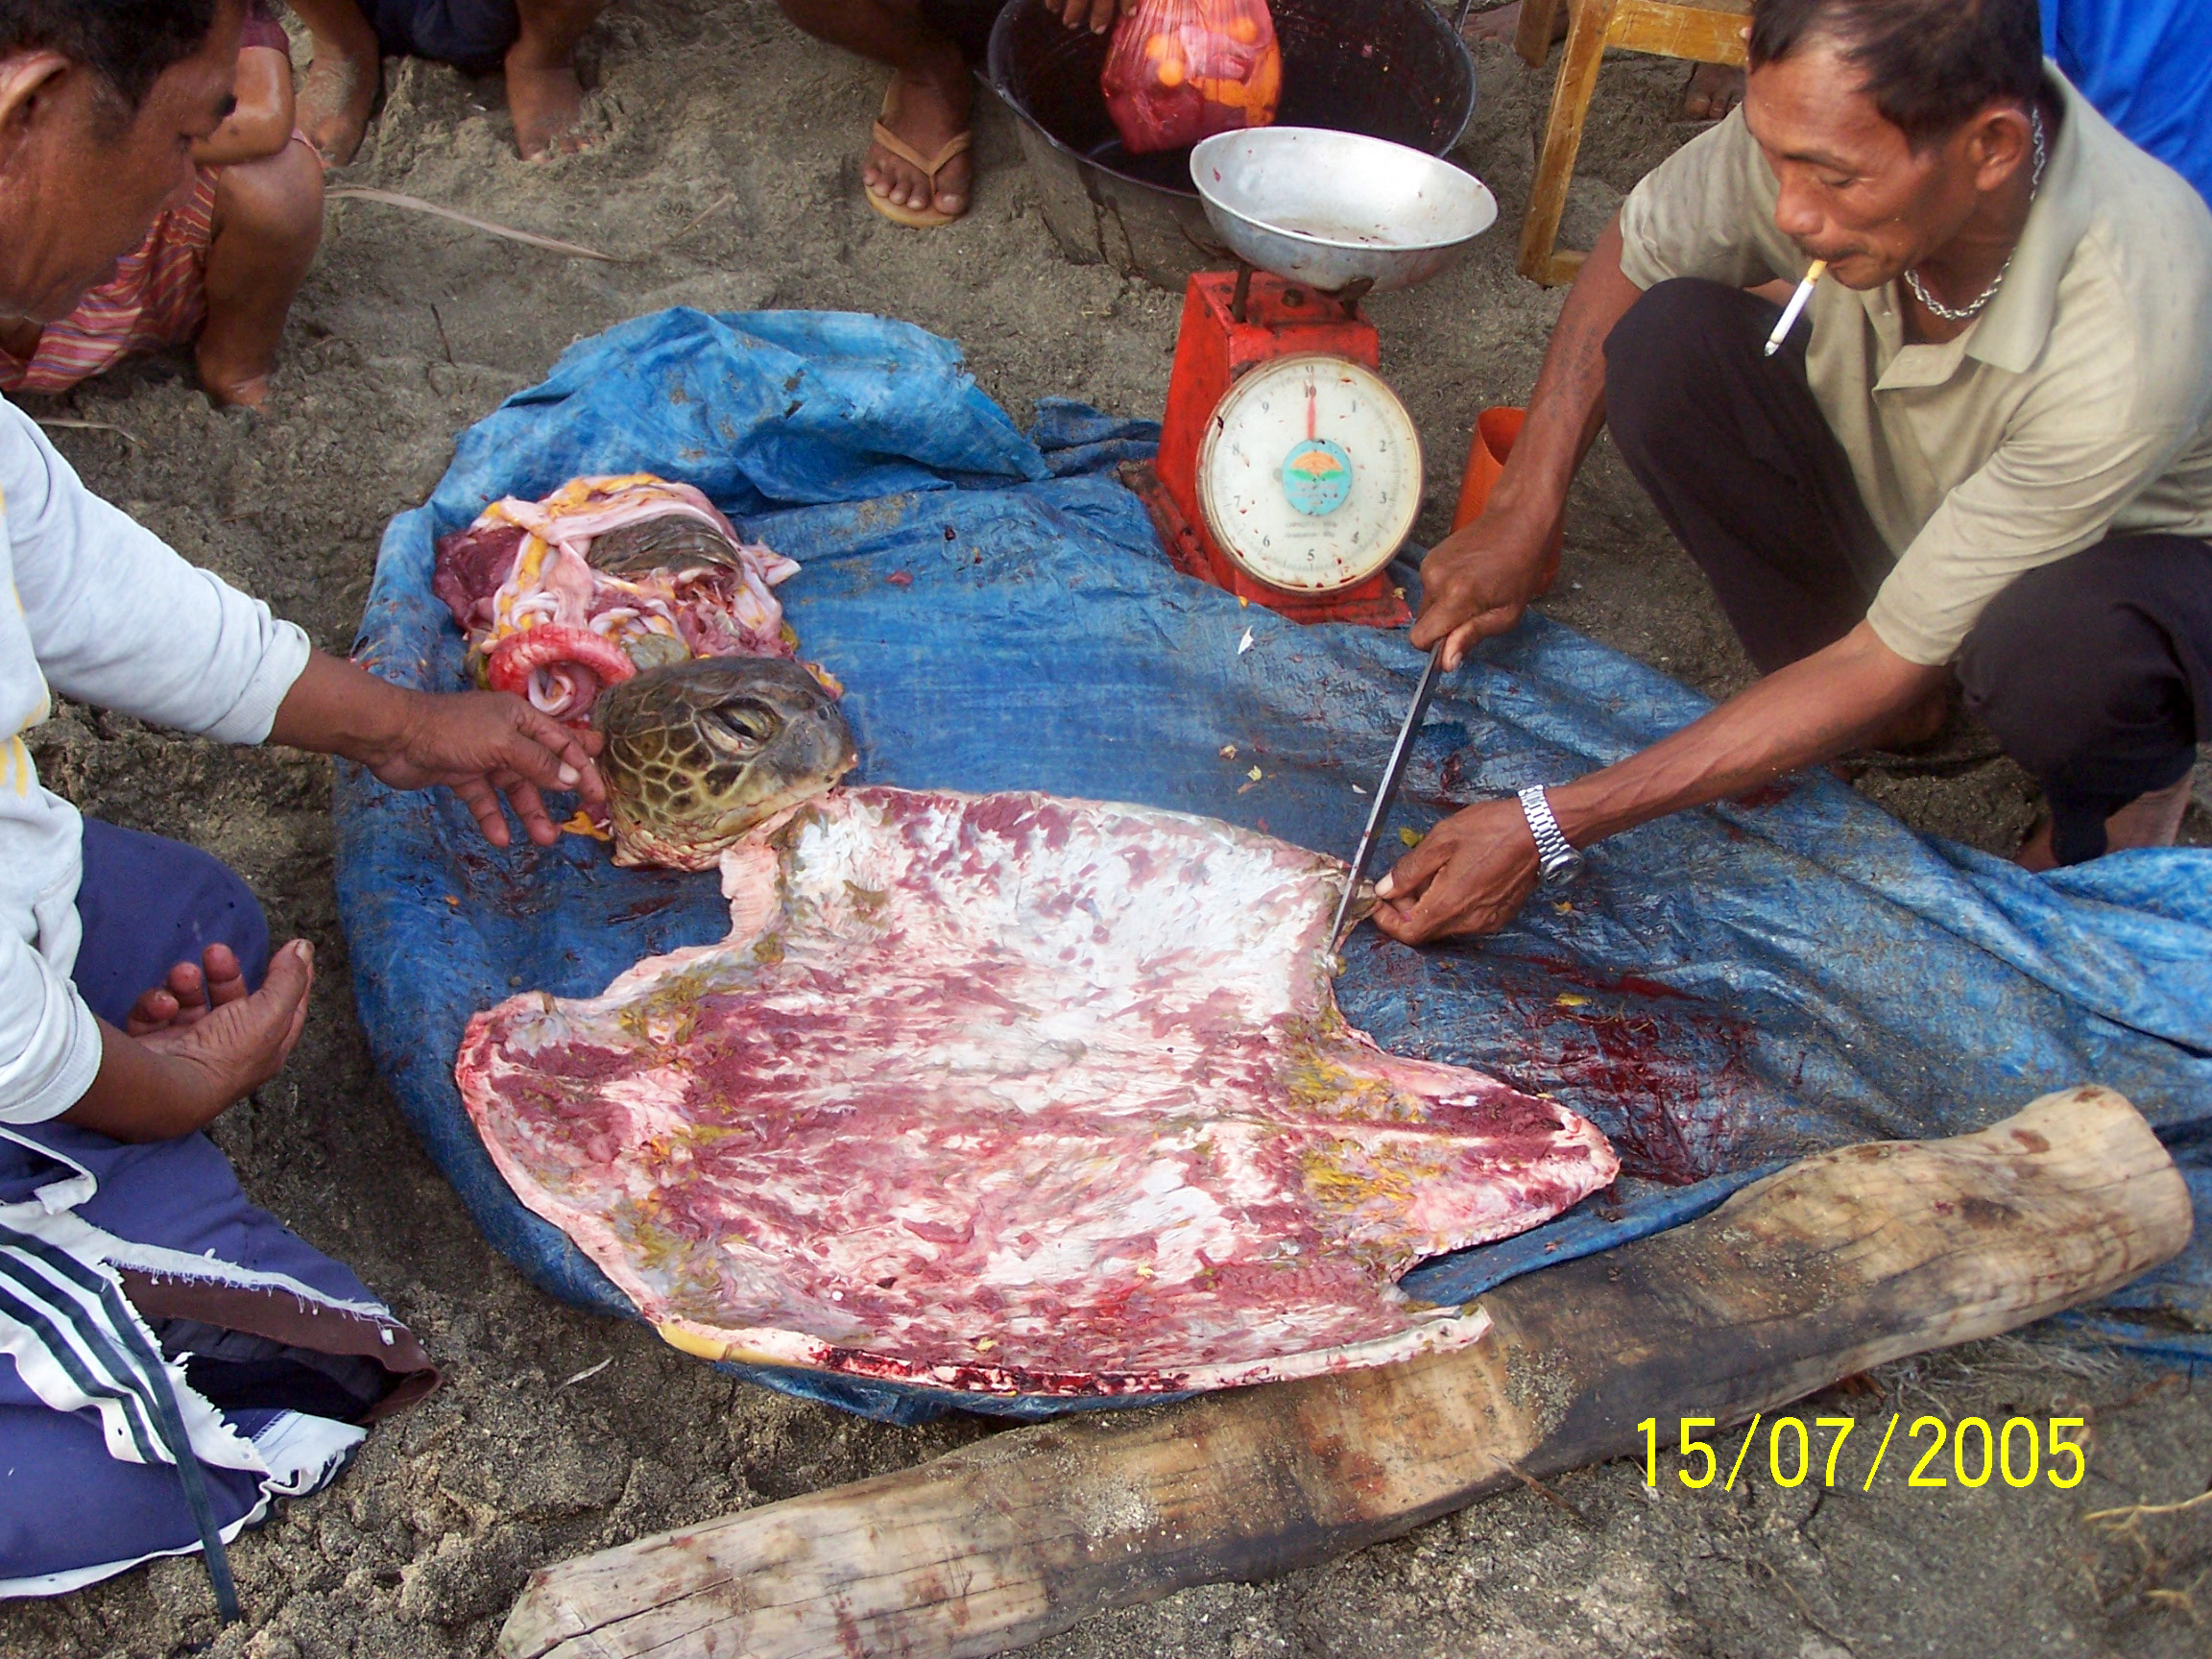 Butchering a sea turtle and distributing meat and eggs to fellow villagers